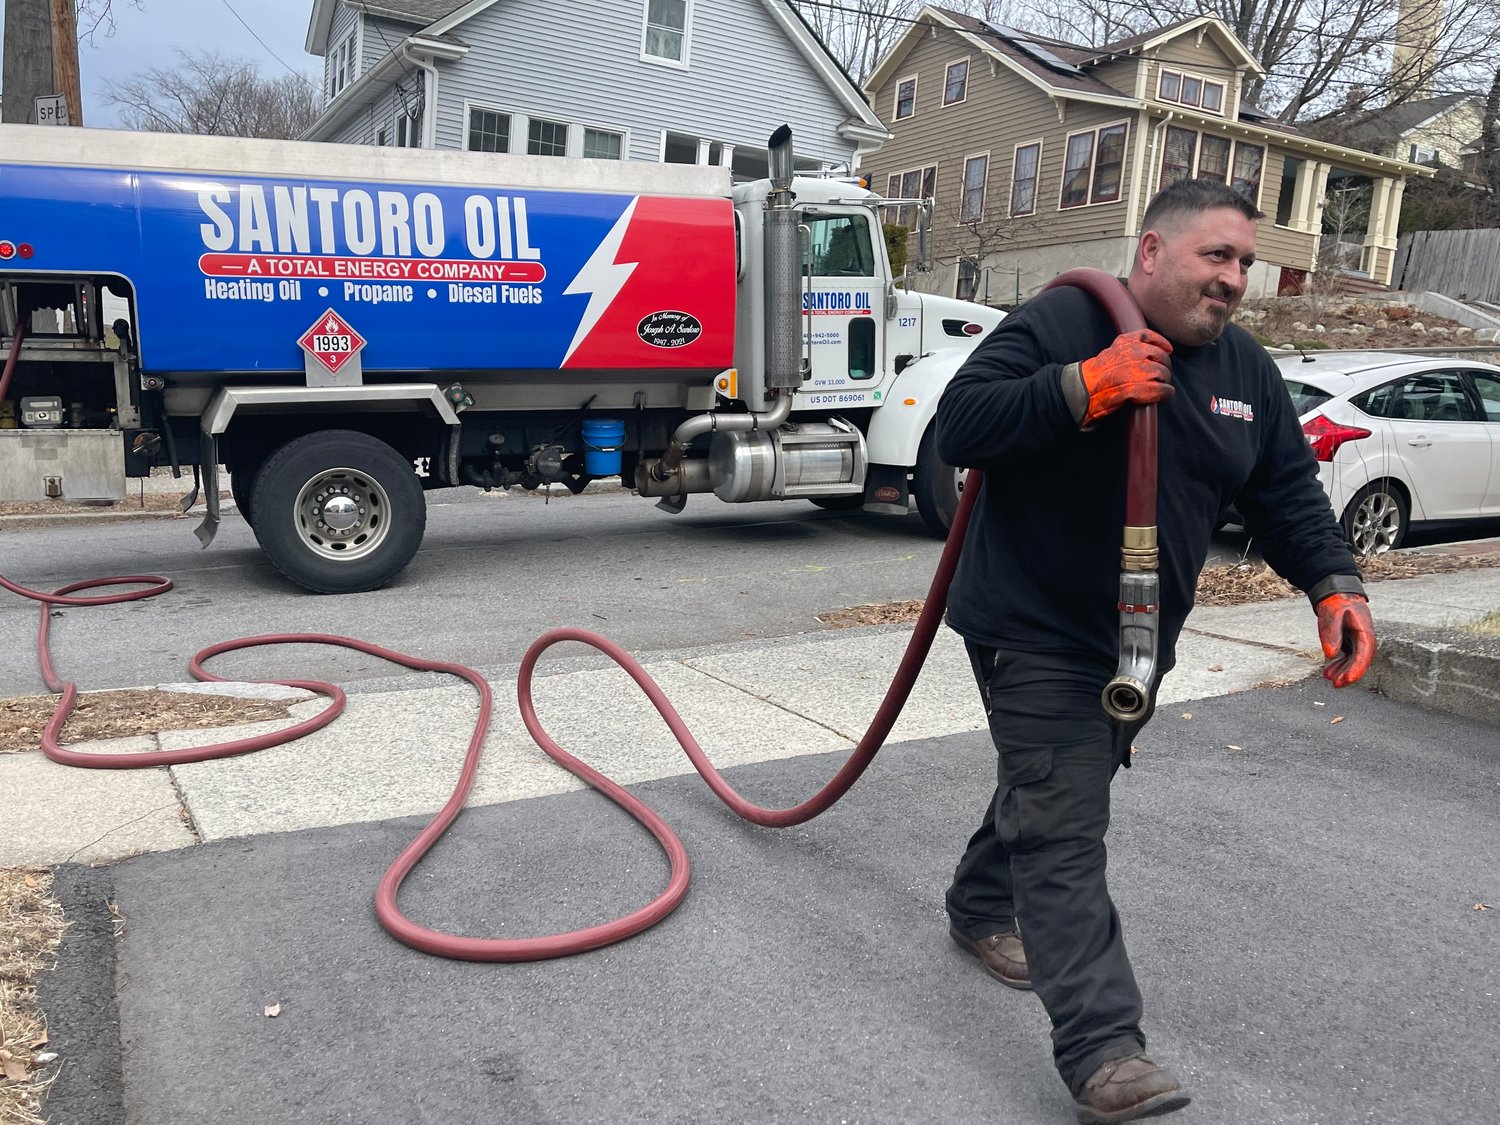 John Shadoian, a driver for Santoro Oil Company, prepares to fill a fuel tank during a stop in Providence. John Santoro, CEO/owner of the Santoro Family of Companies, which includes Santoro Oil, which has been in business since 1952, made a $50,000 donation this year to Keep the Heat On.